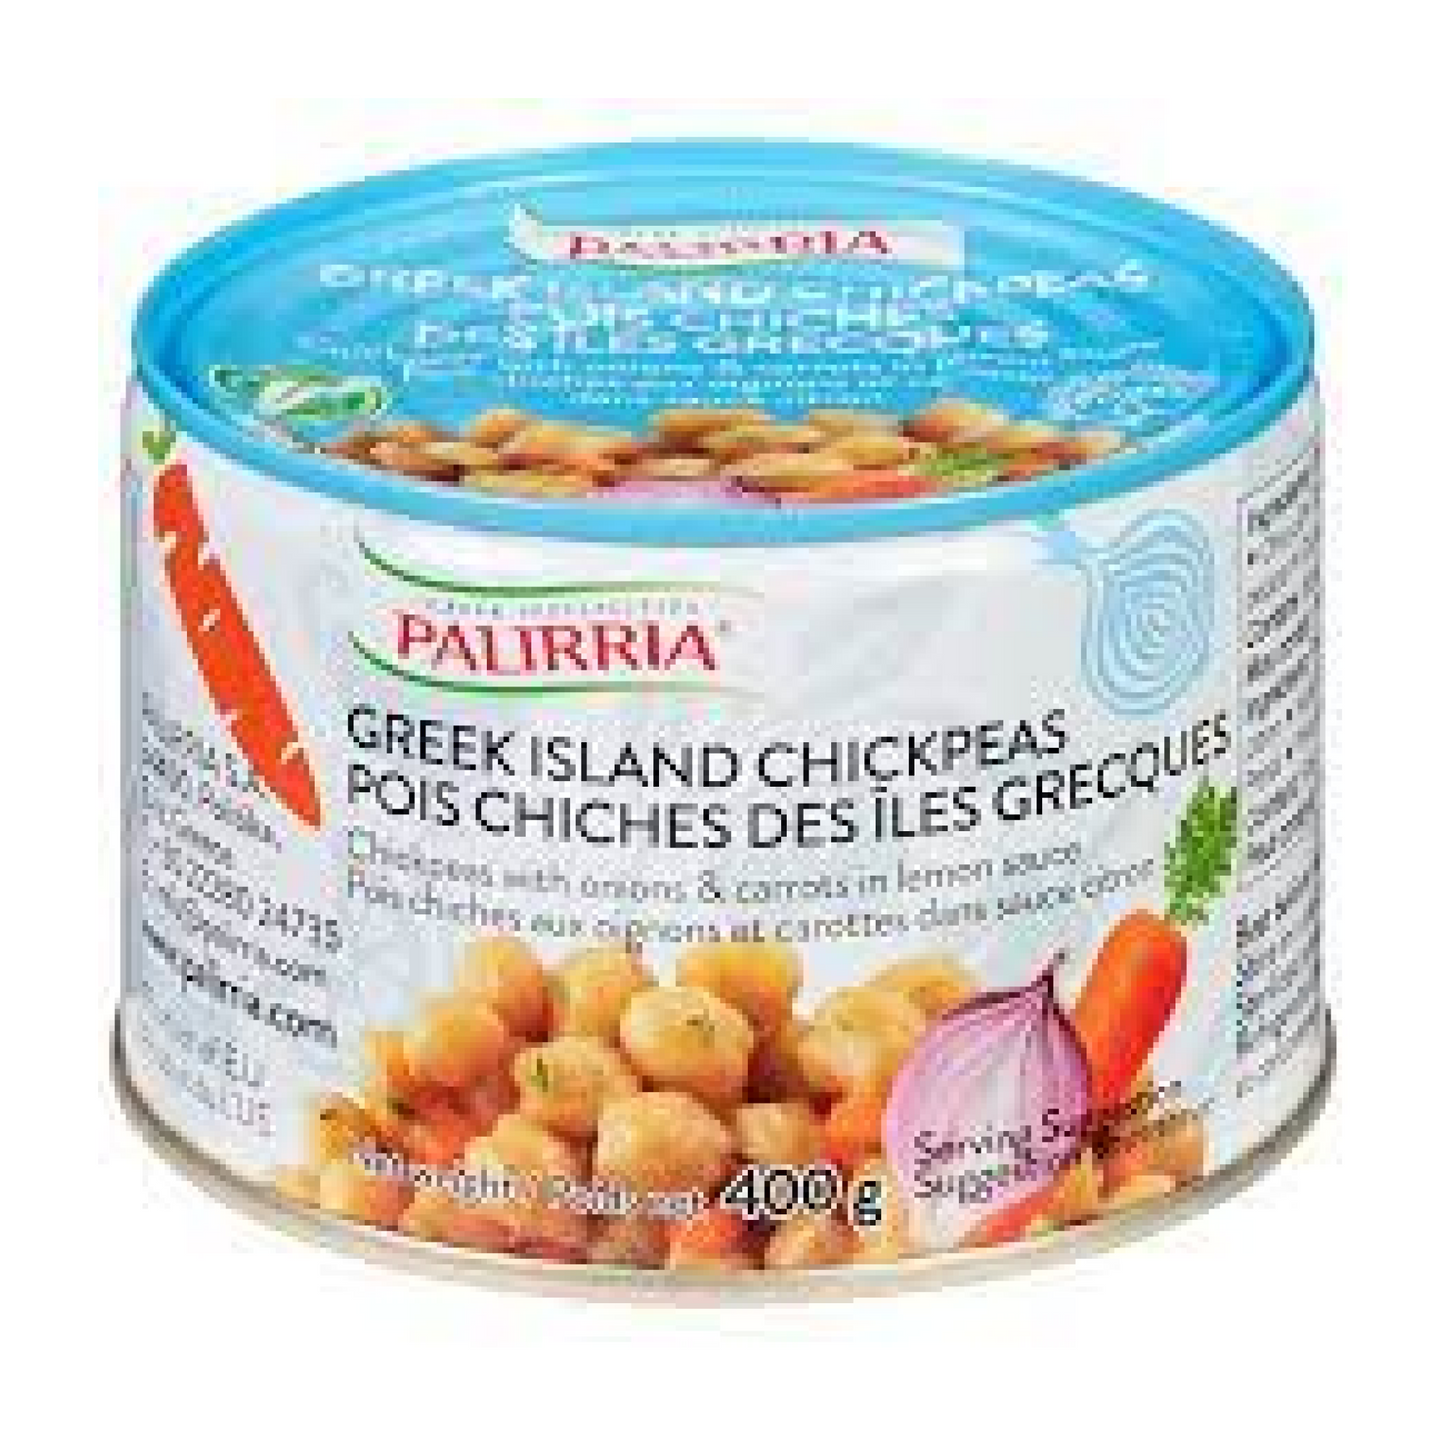 Palirria Greek Island Chickpeas with Onions and Carrots in Lemon Sauce 400g